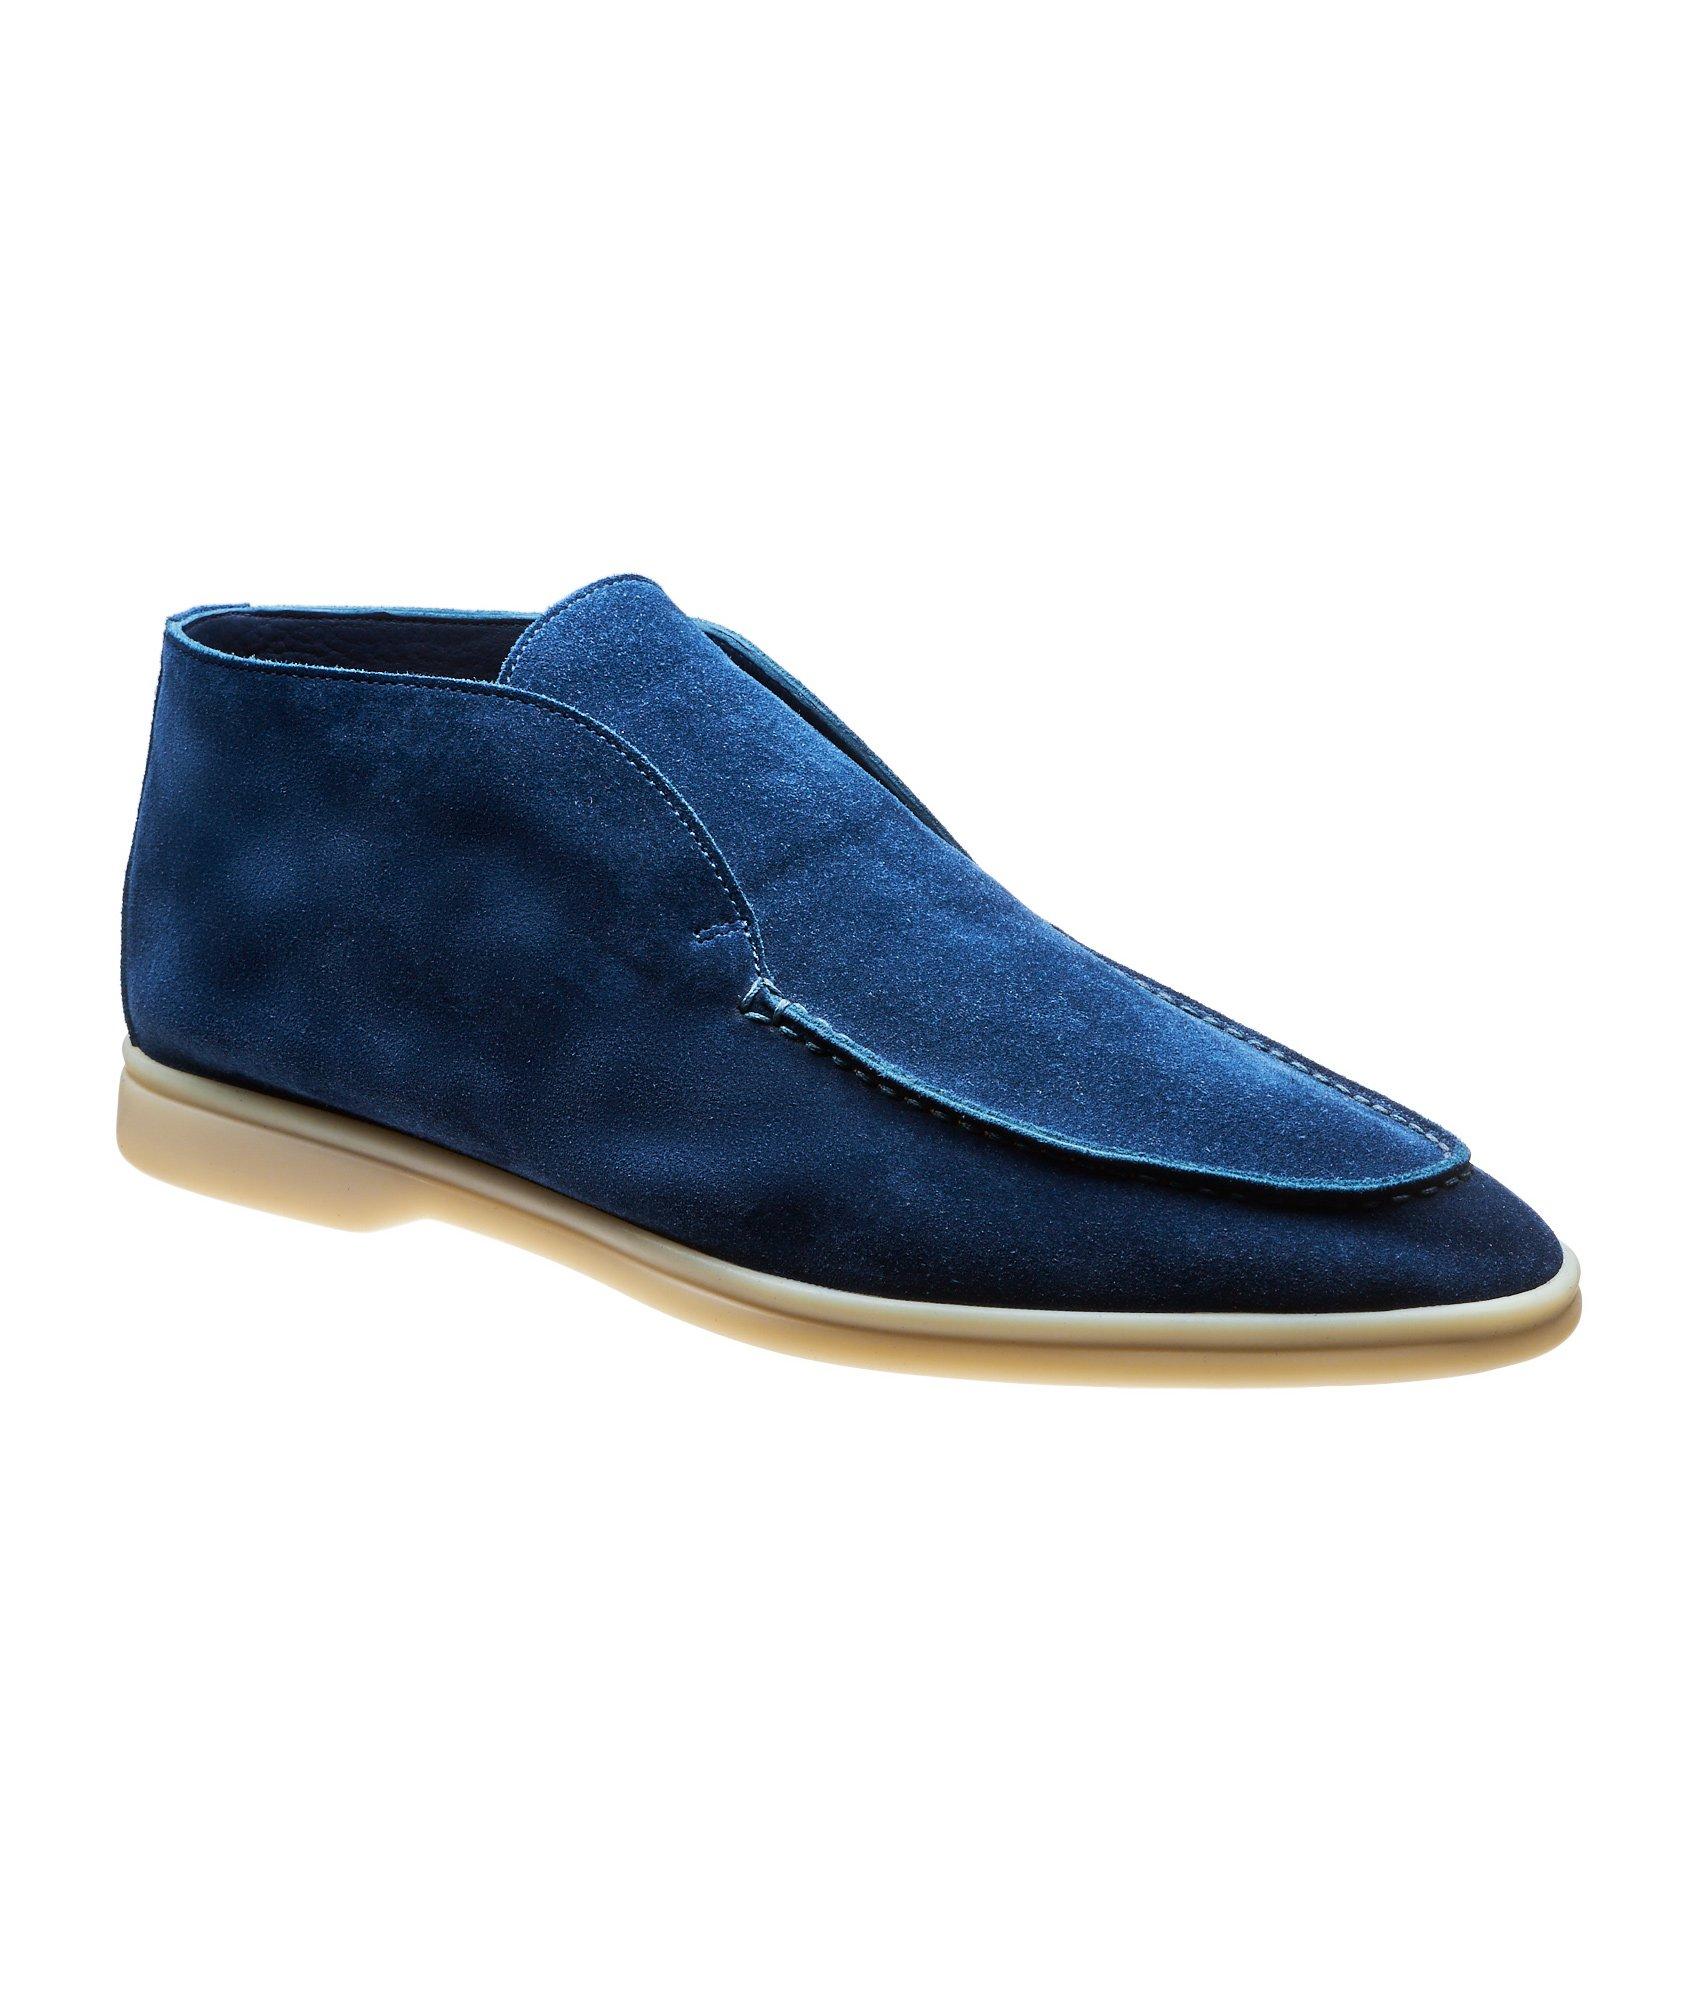 Open Walk Suede Slip-On Boots image 0